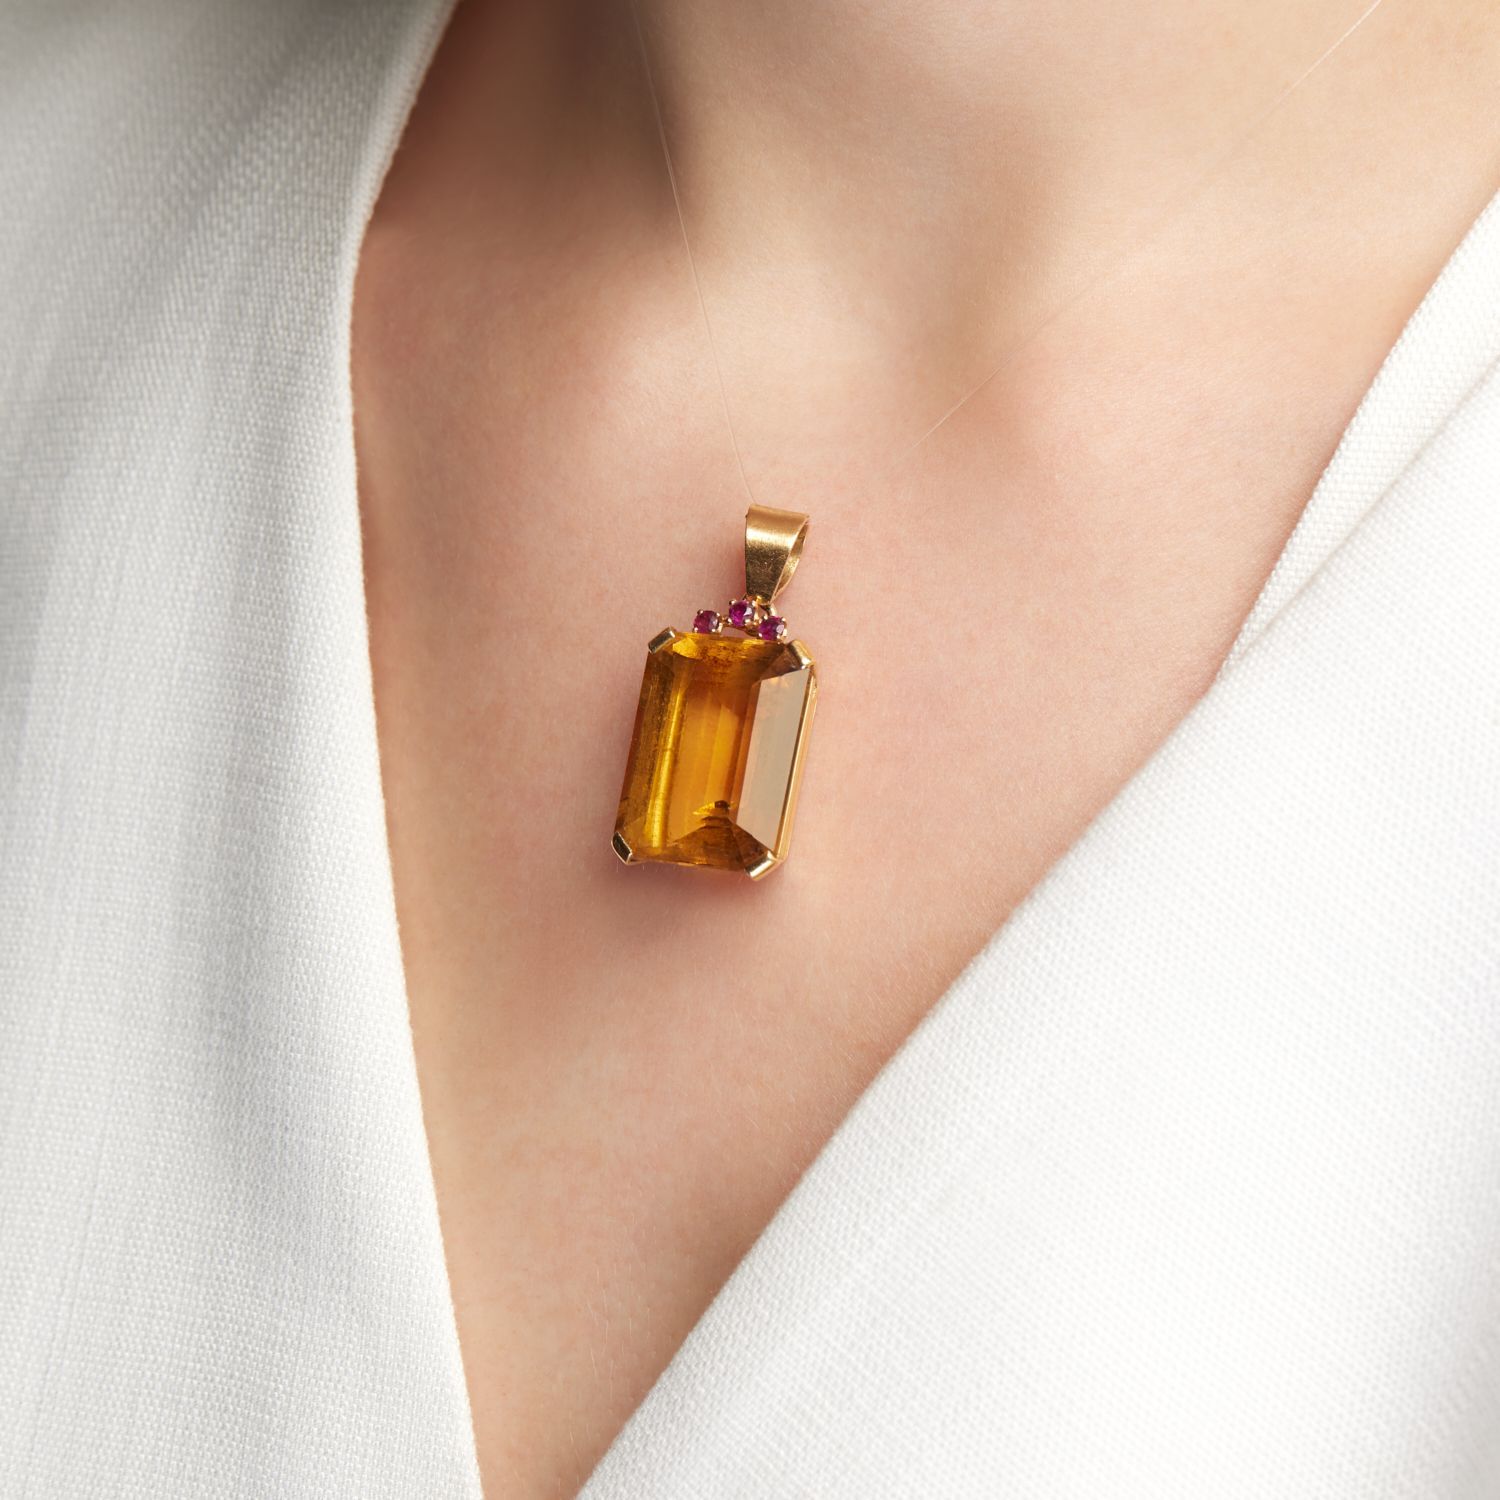 Null YEARS 1970
CITRINE PENDANT
This pendant is set with a large rectangular cit&hellip;